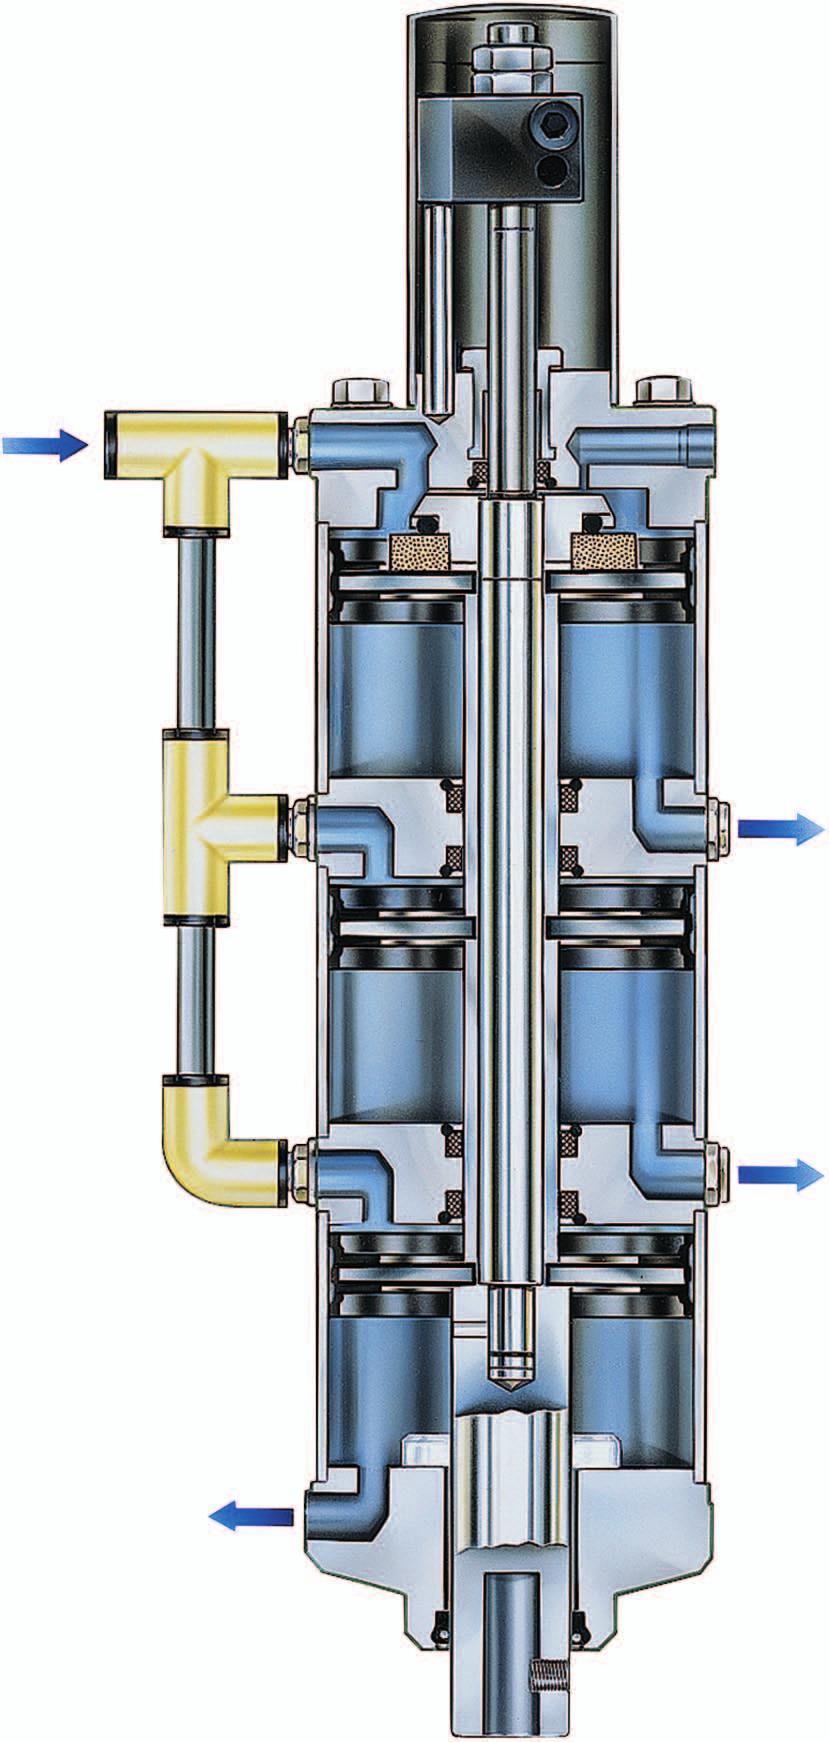 Principle of operation unctional description considering the example of a 3-chamber pneumatic cylinder In working stroke, three pistons 7 connected by the piston rod 6 are pressurized with compressed